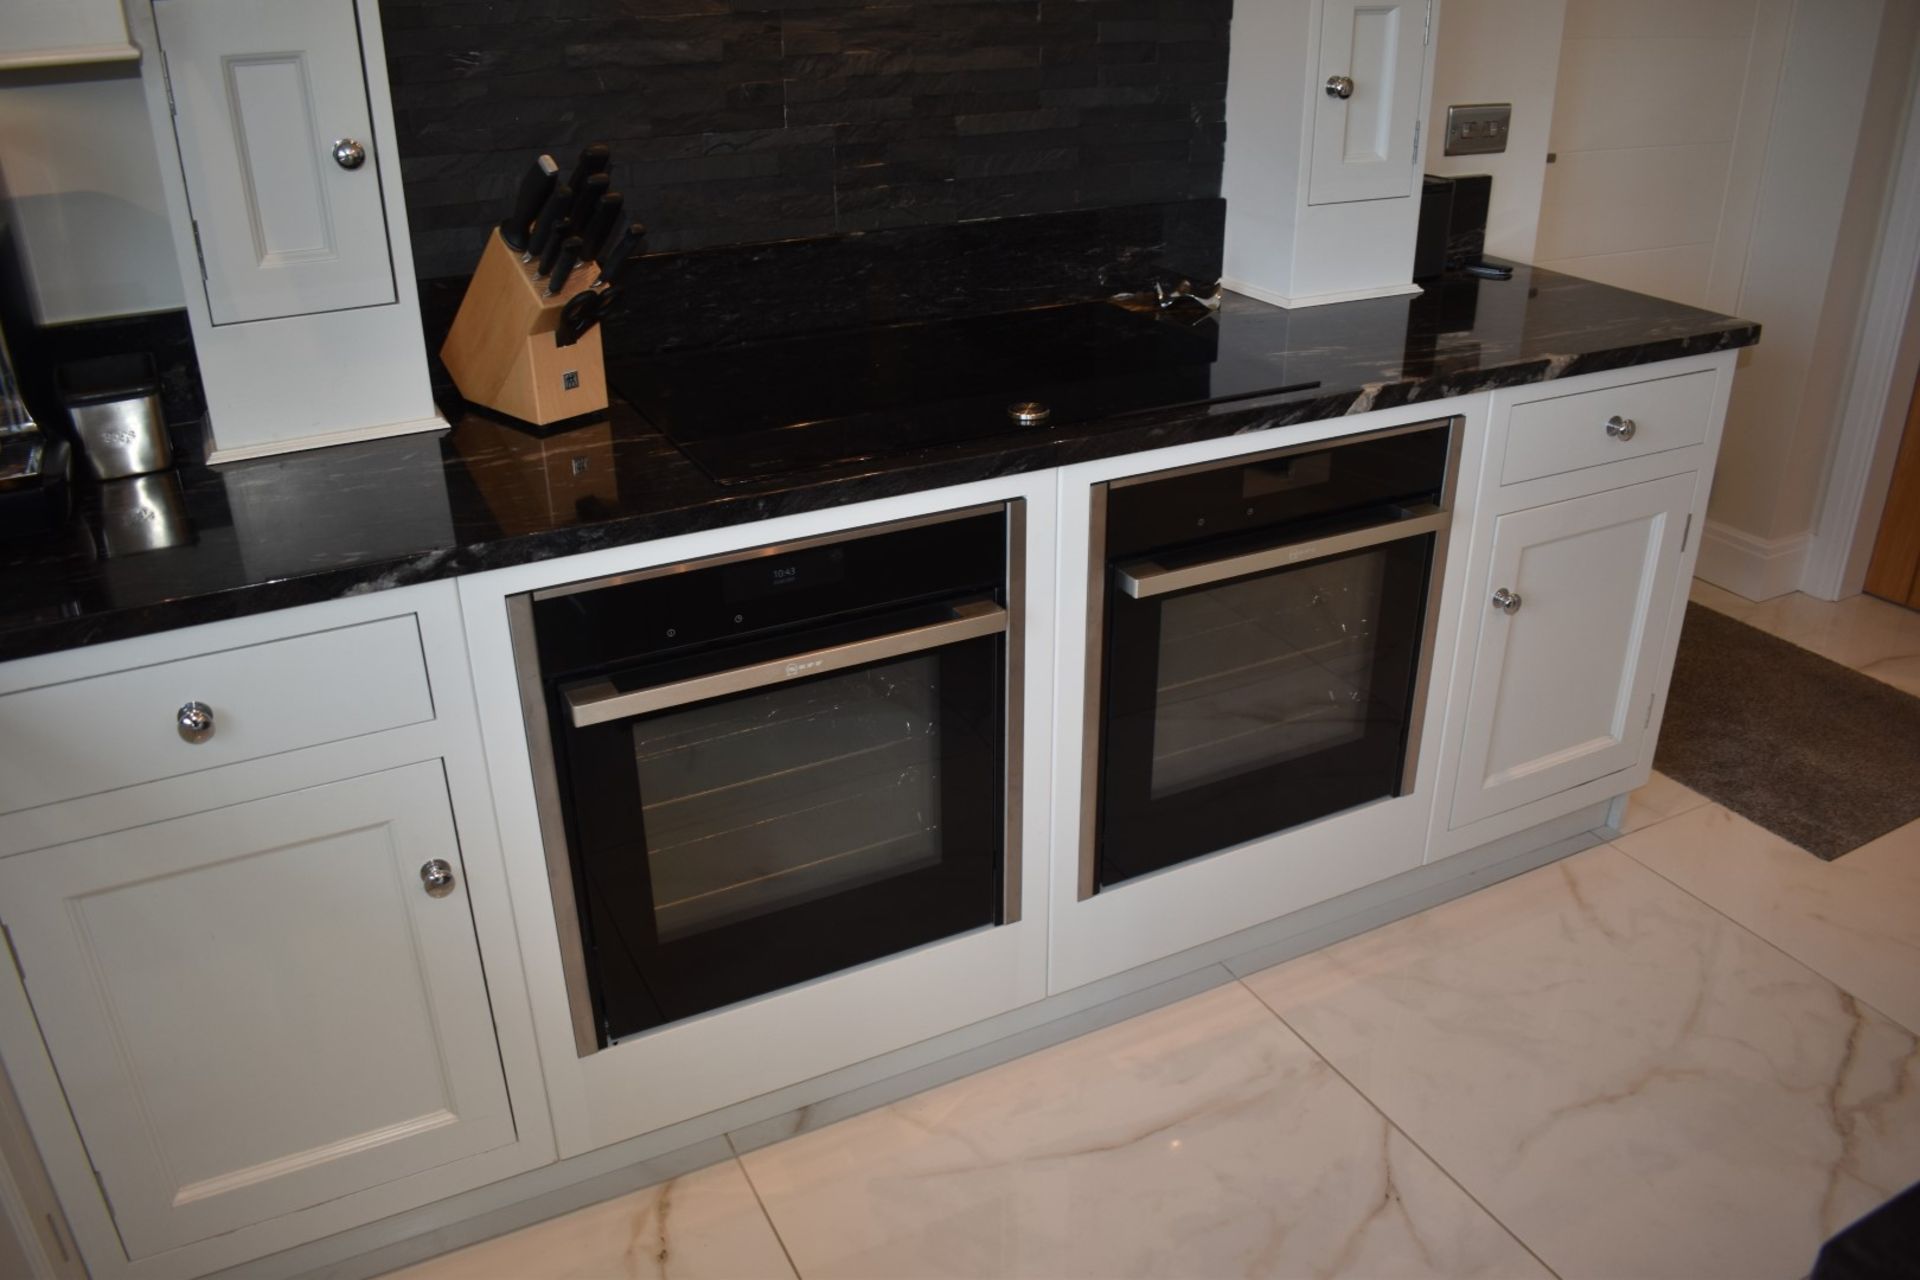 1 x Bespoke Handmade Framed Fitted Kitchen By Matthew Marsden Furniture - Features Hand Painted - Image 29 of 97